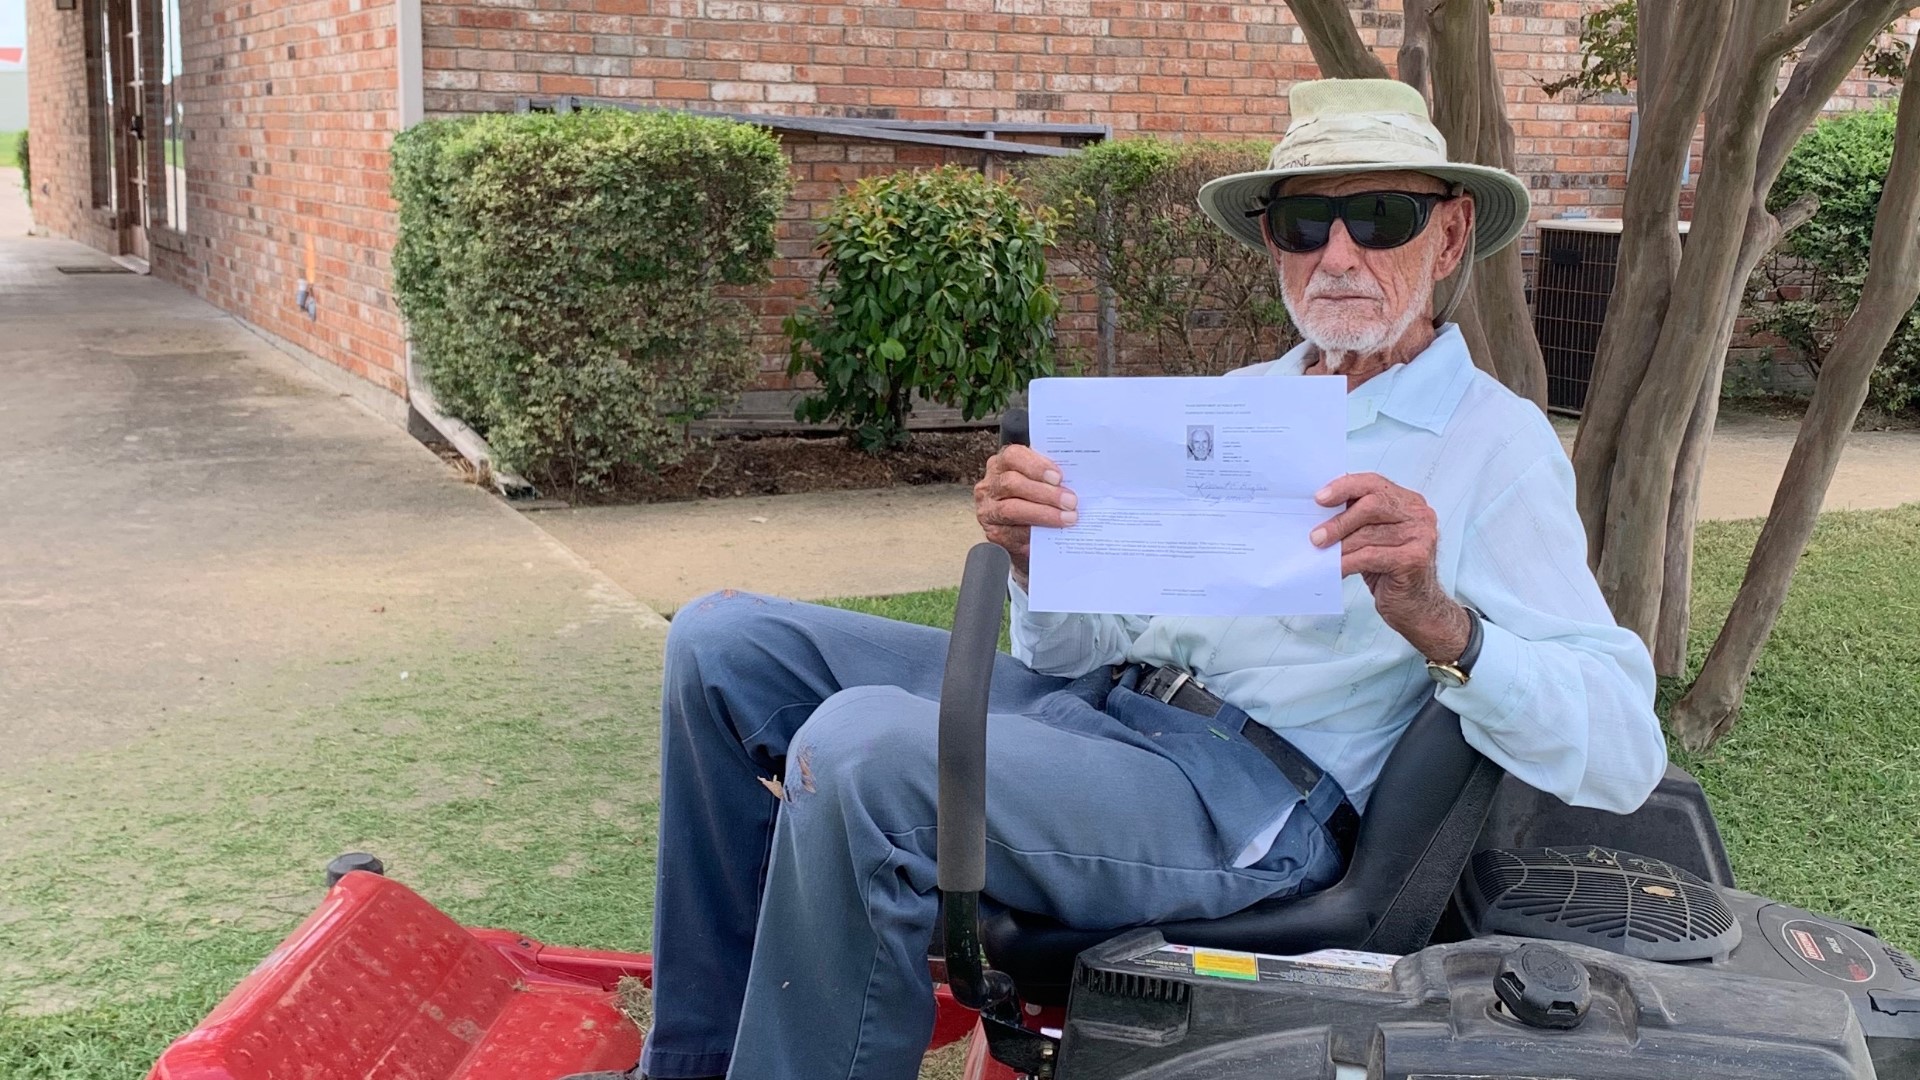 Two days after 95-year-old Albert Bigler asked for help getting his driver's license renewed, he has his new temporary license in hand thanks to the work of friends, advice from WFAA viewers, and the assistance of the Texas Department of Public Safety.